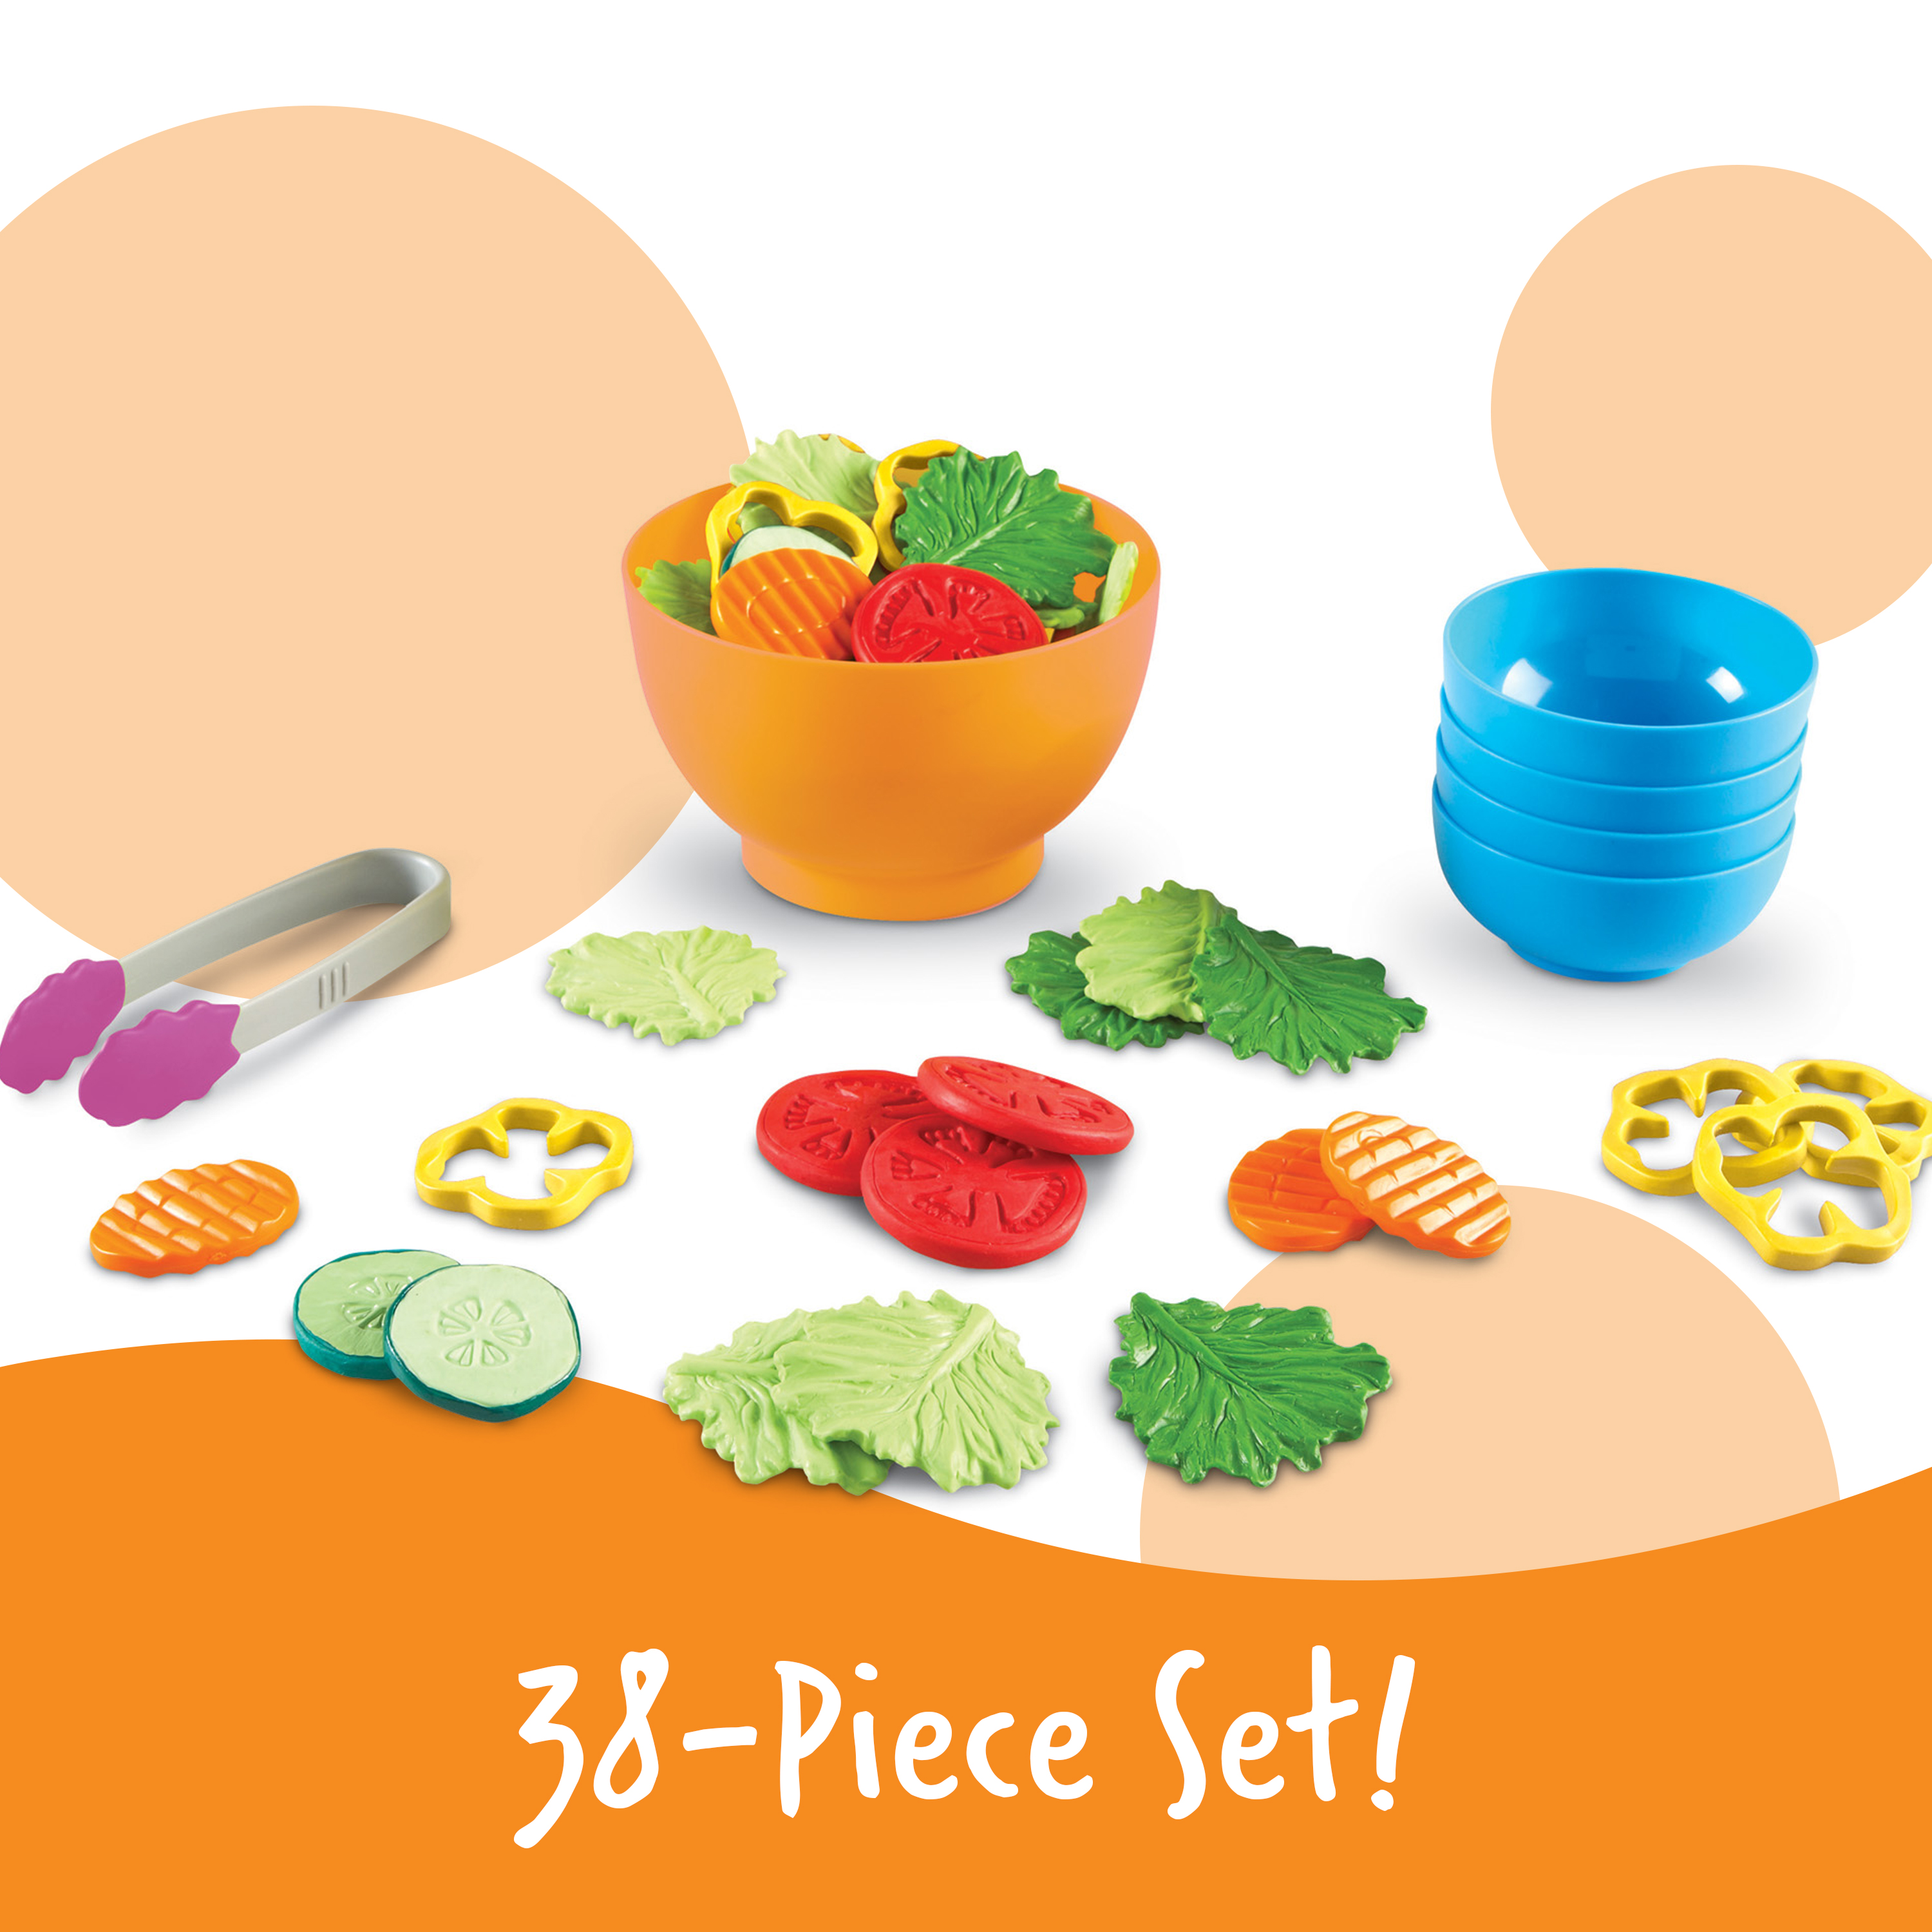 Learning Resources New Sprouts Garden Fresh Salad Playset, Play Pretend Kitchen Activity Preschool Toy for Kids Girls Boys Ages 2 3 4+ Year Old - image 2 of 5